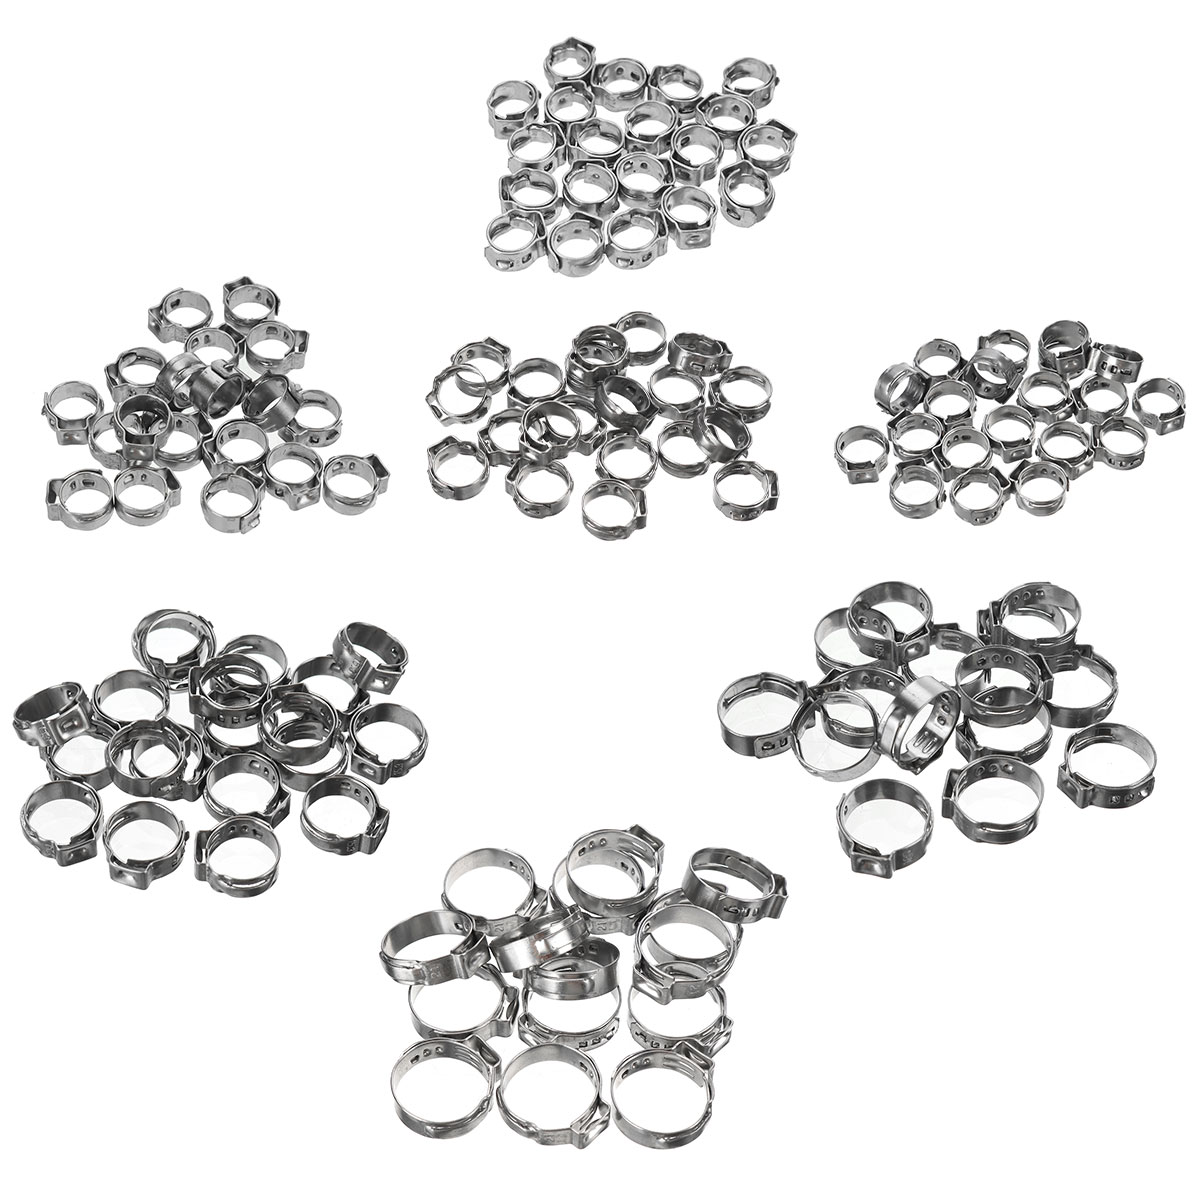 130-Pcs-1-Ear-Hose-Clamps-Stainless-Steel-Assortment-of-Hose-Clamps-Vehicle-Galvanized-1866090-3